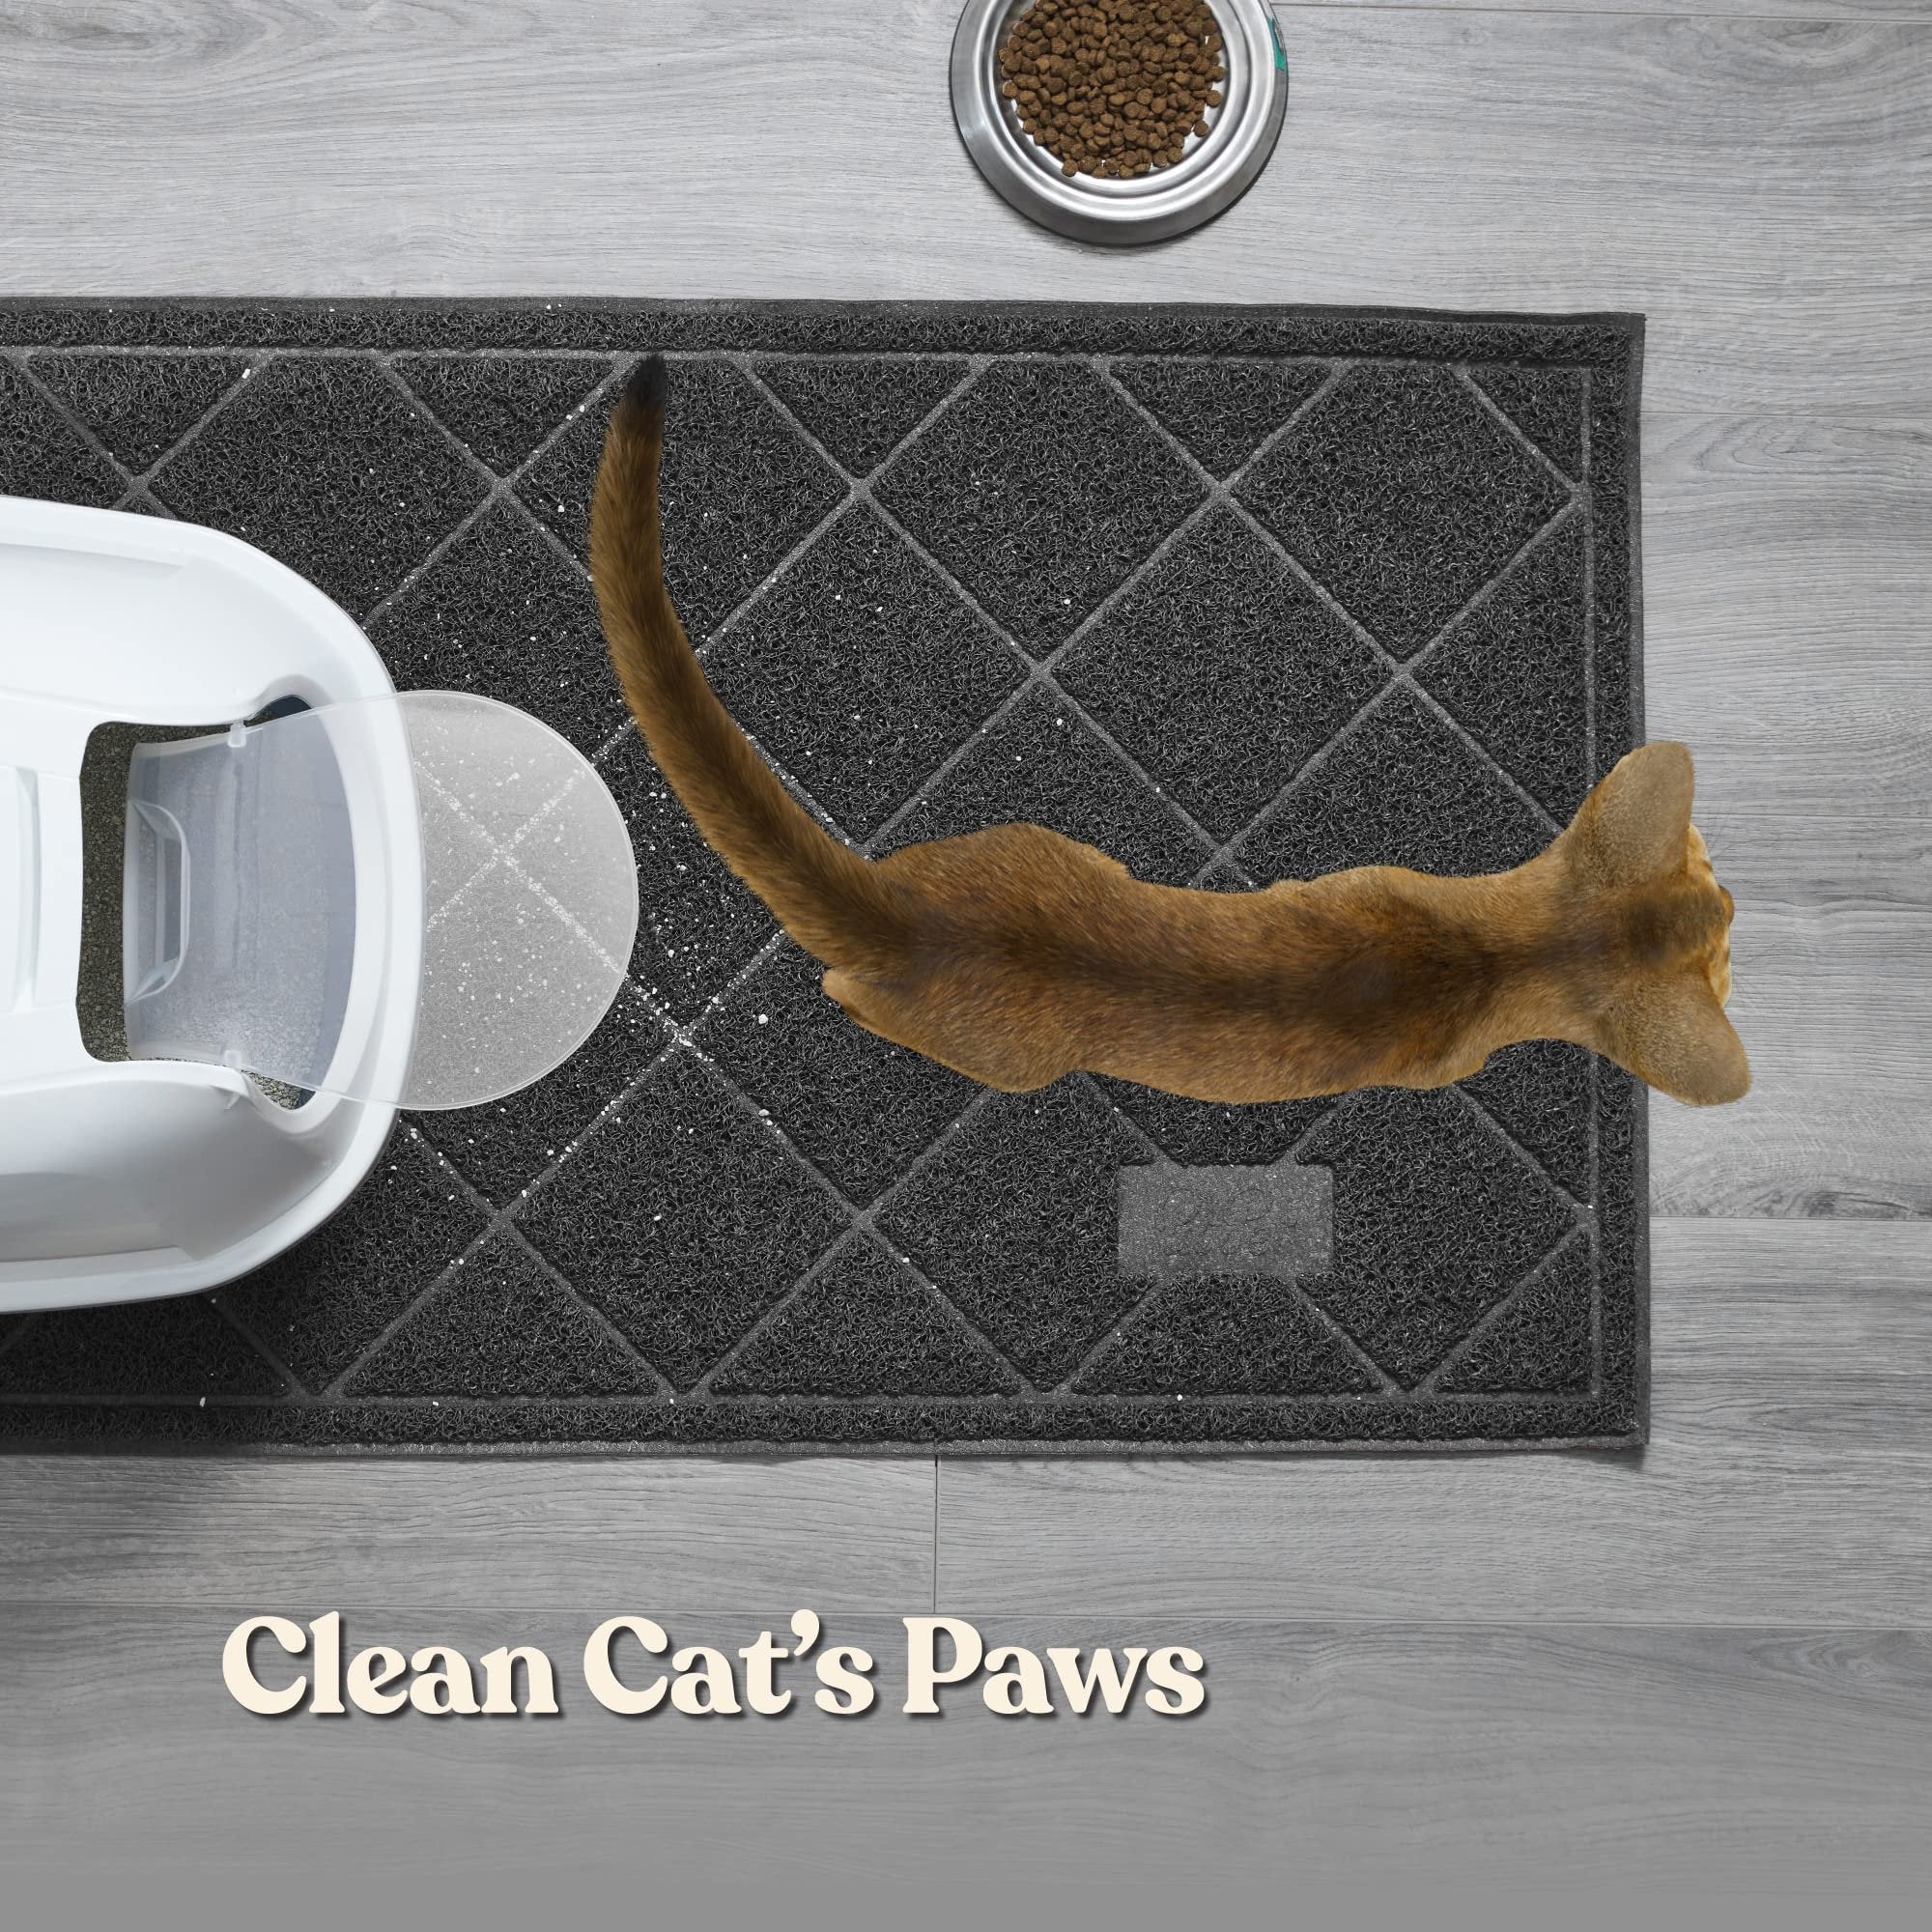 Durable Thick Cat Litter Mat - Modern Cat Mat With Non-Slip Bottom Stays In Place - Super Soft On Kitty Paws - Easy To Clean Litter Box Mat - Waterproof Cat Litter Trapping Mat Protect Floors.